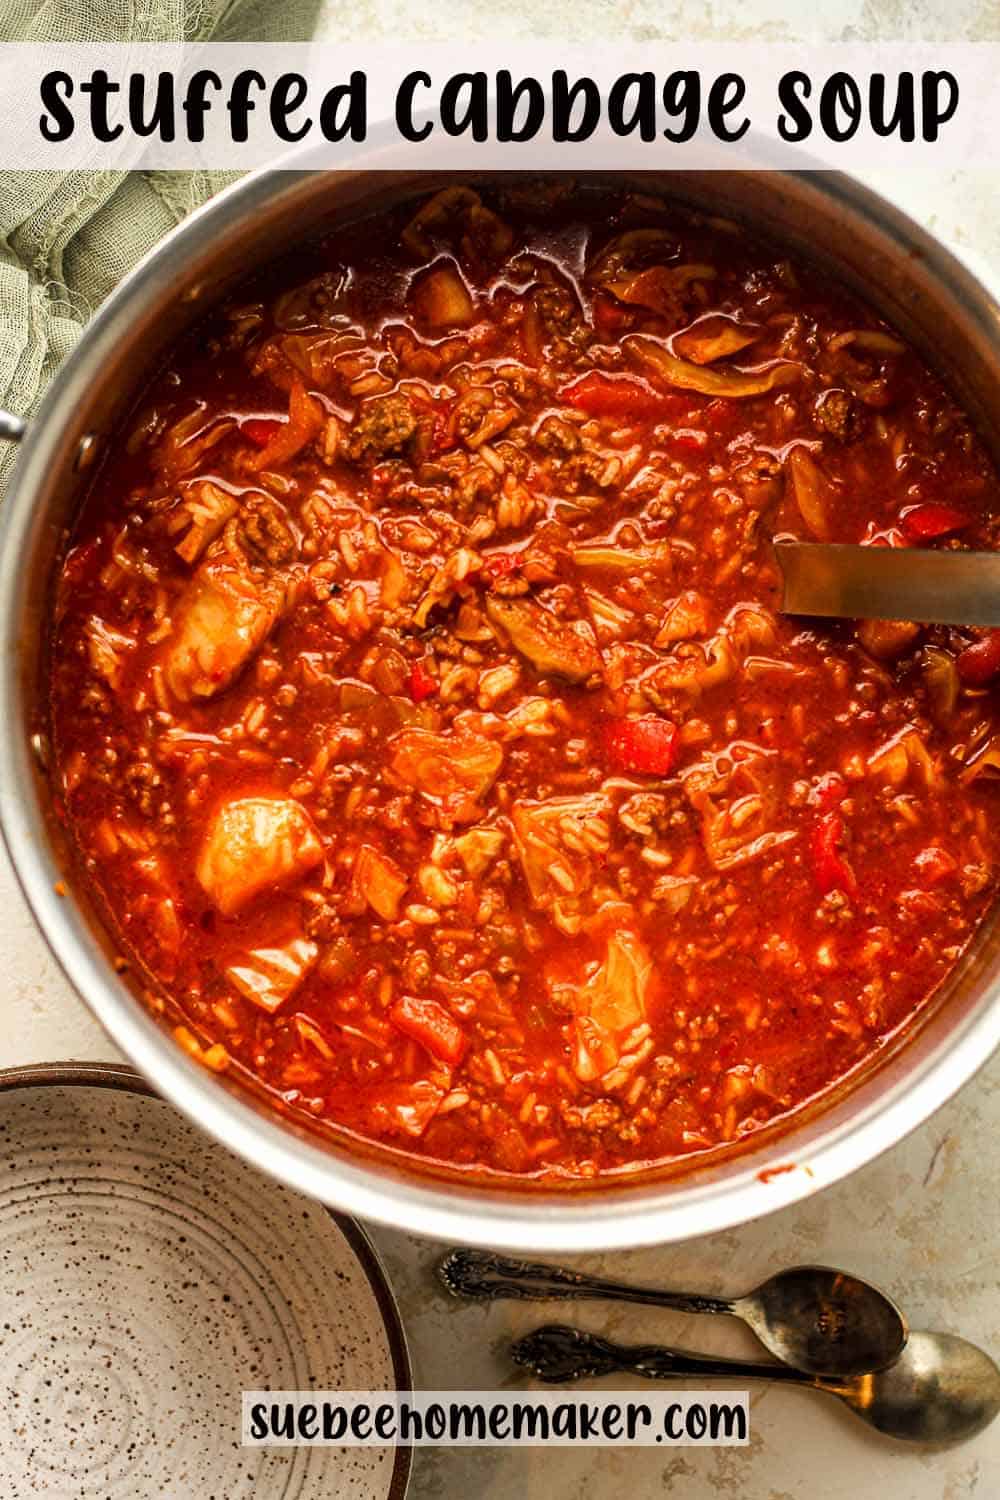 A large pot of stuffed cabbage soup with a soup ladle.